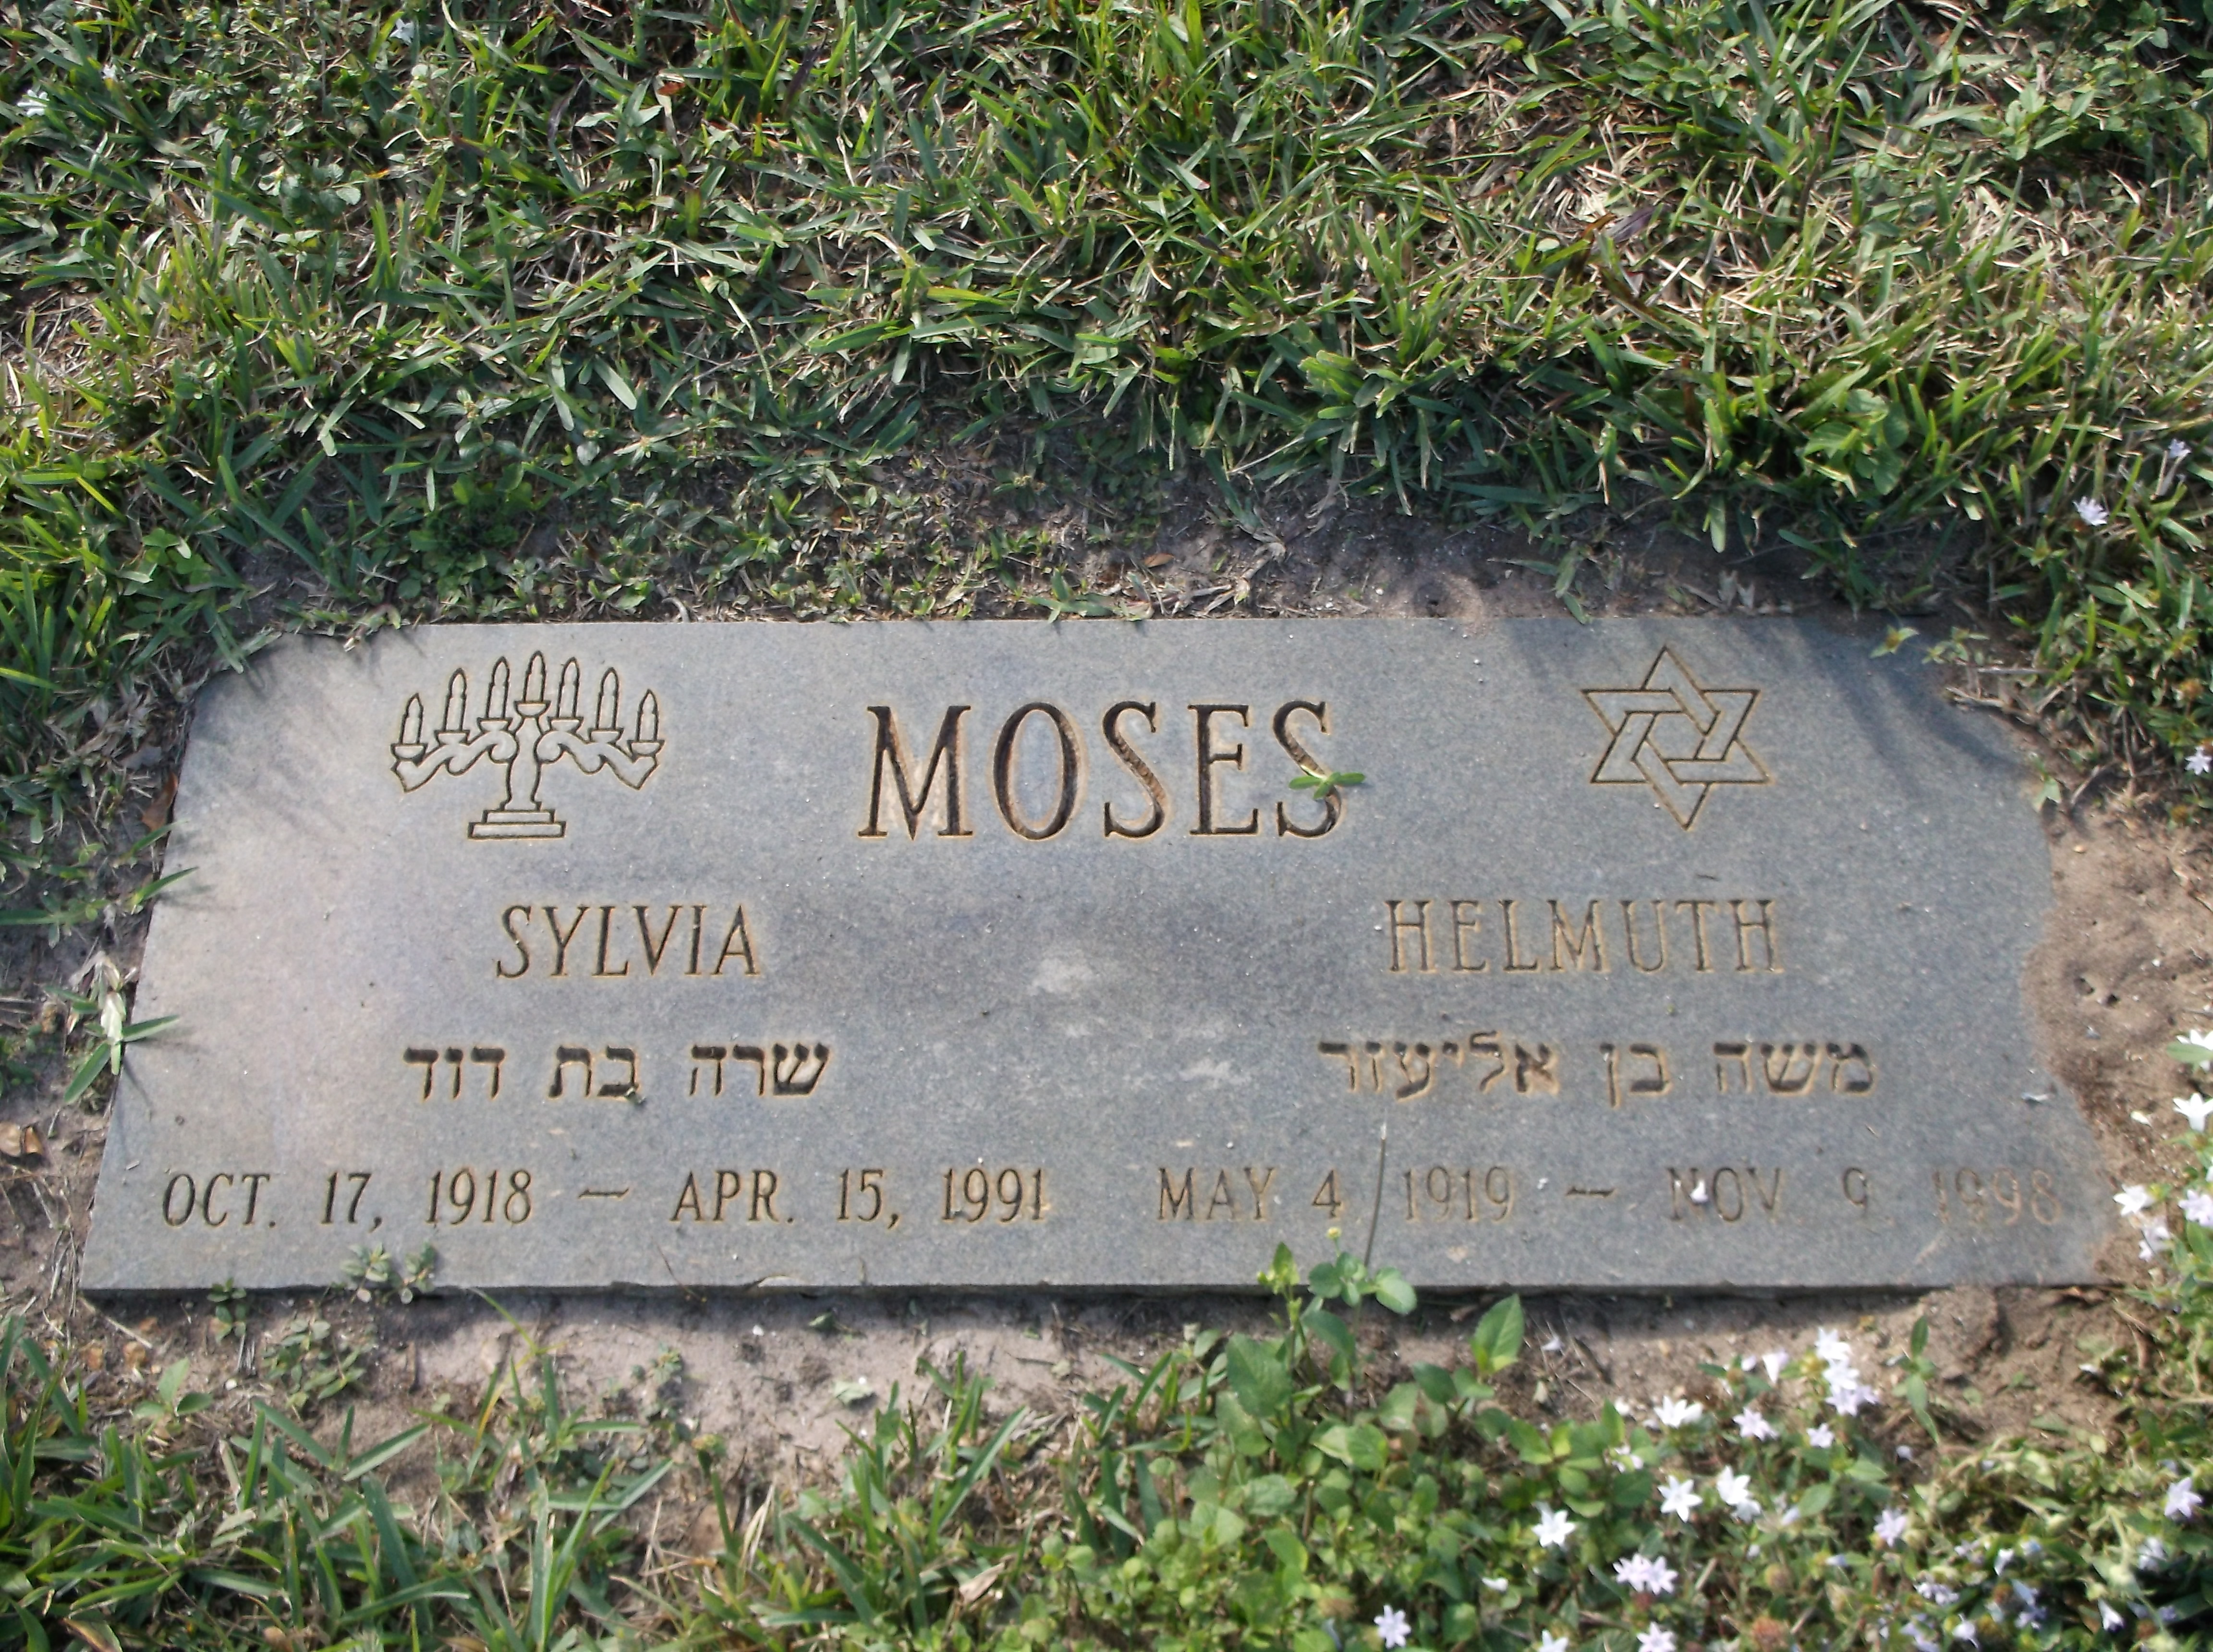 Helmuth Moses